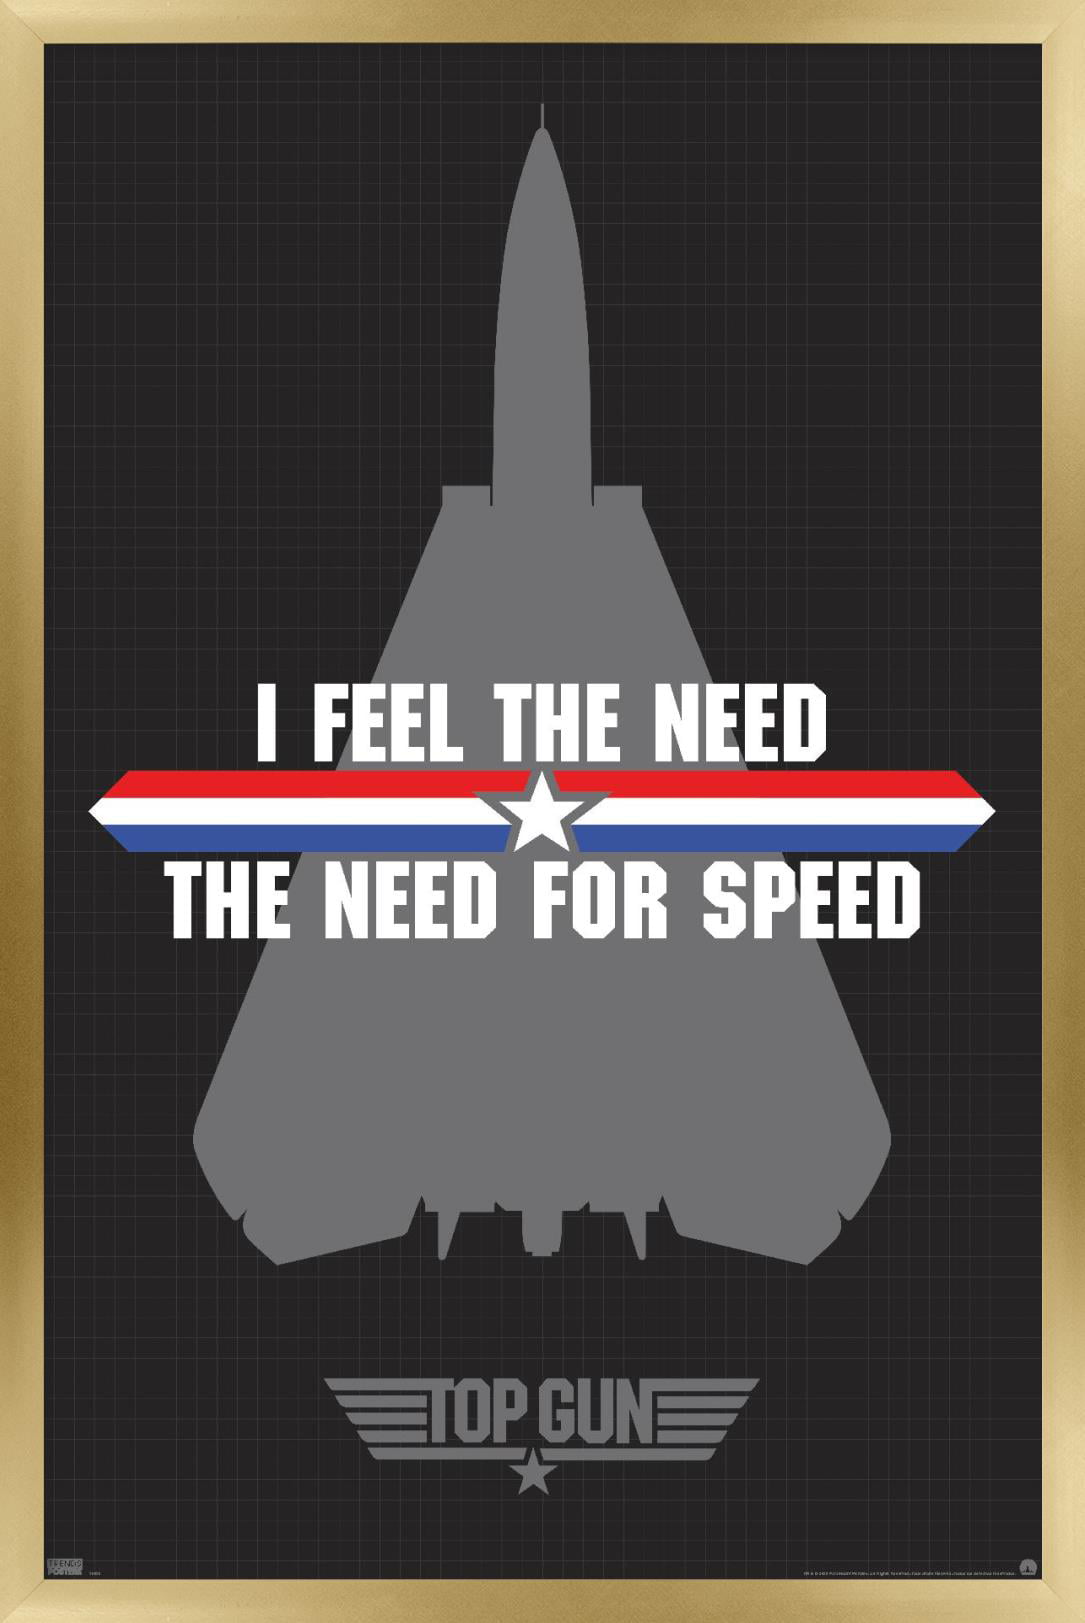 I feel the need, the need for speed. | Poster